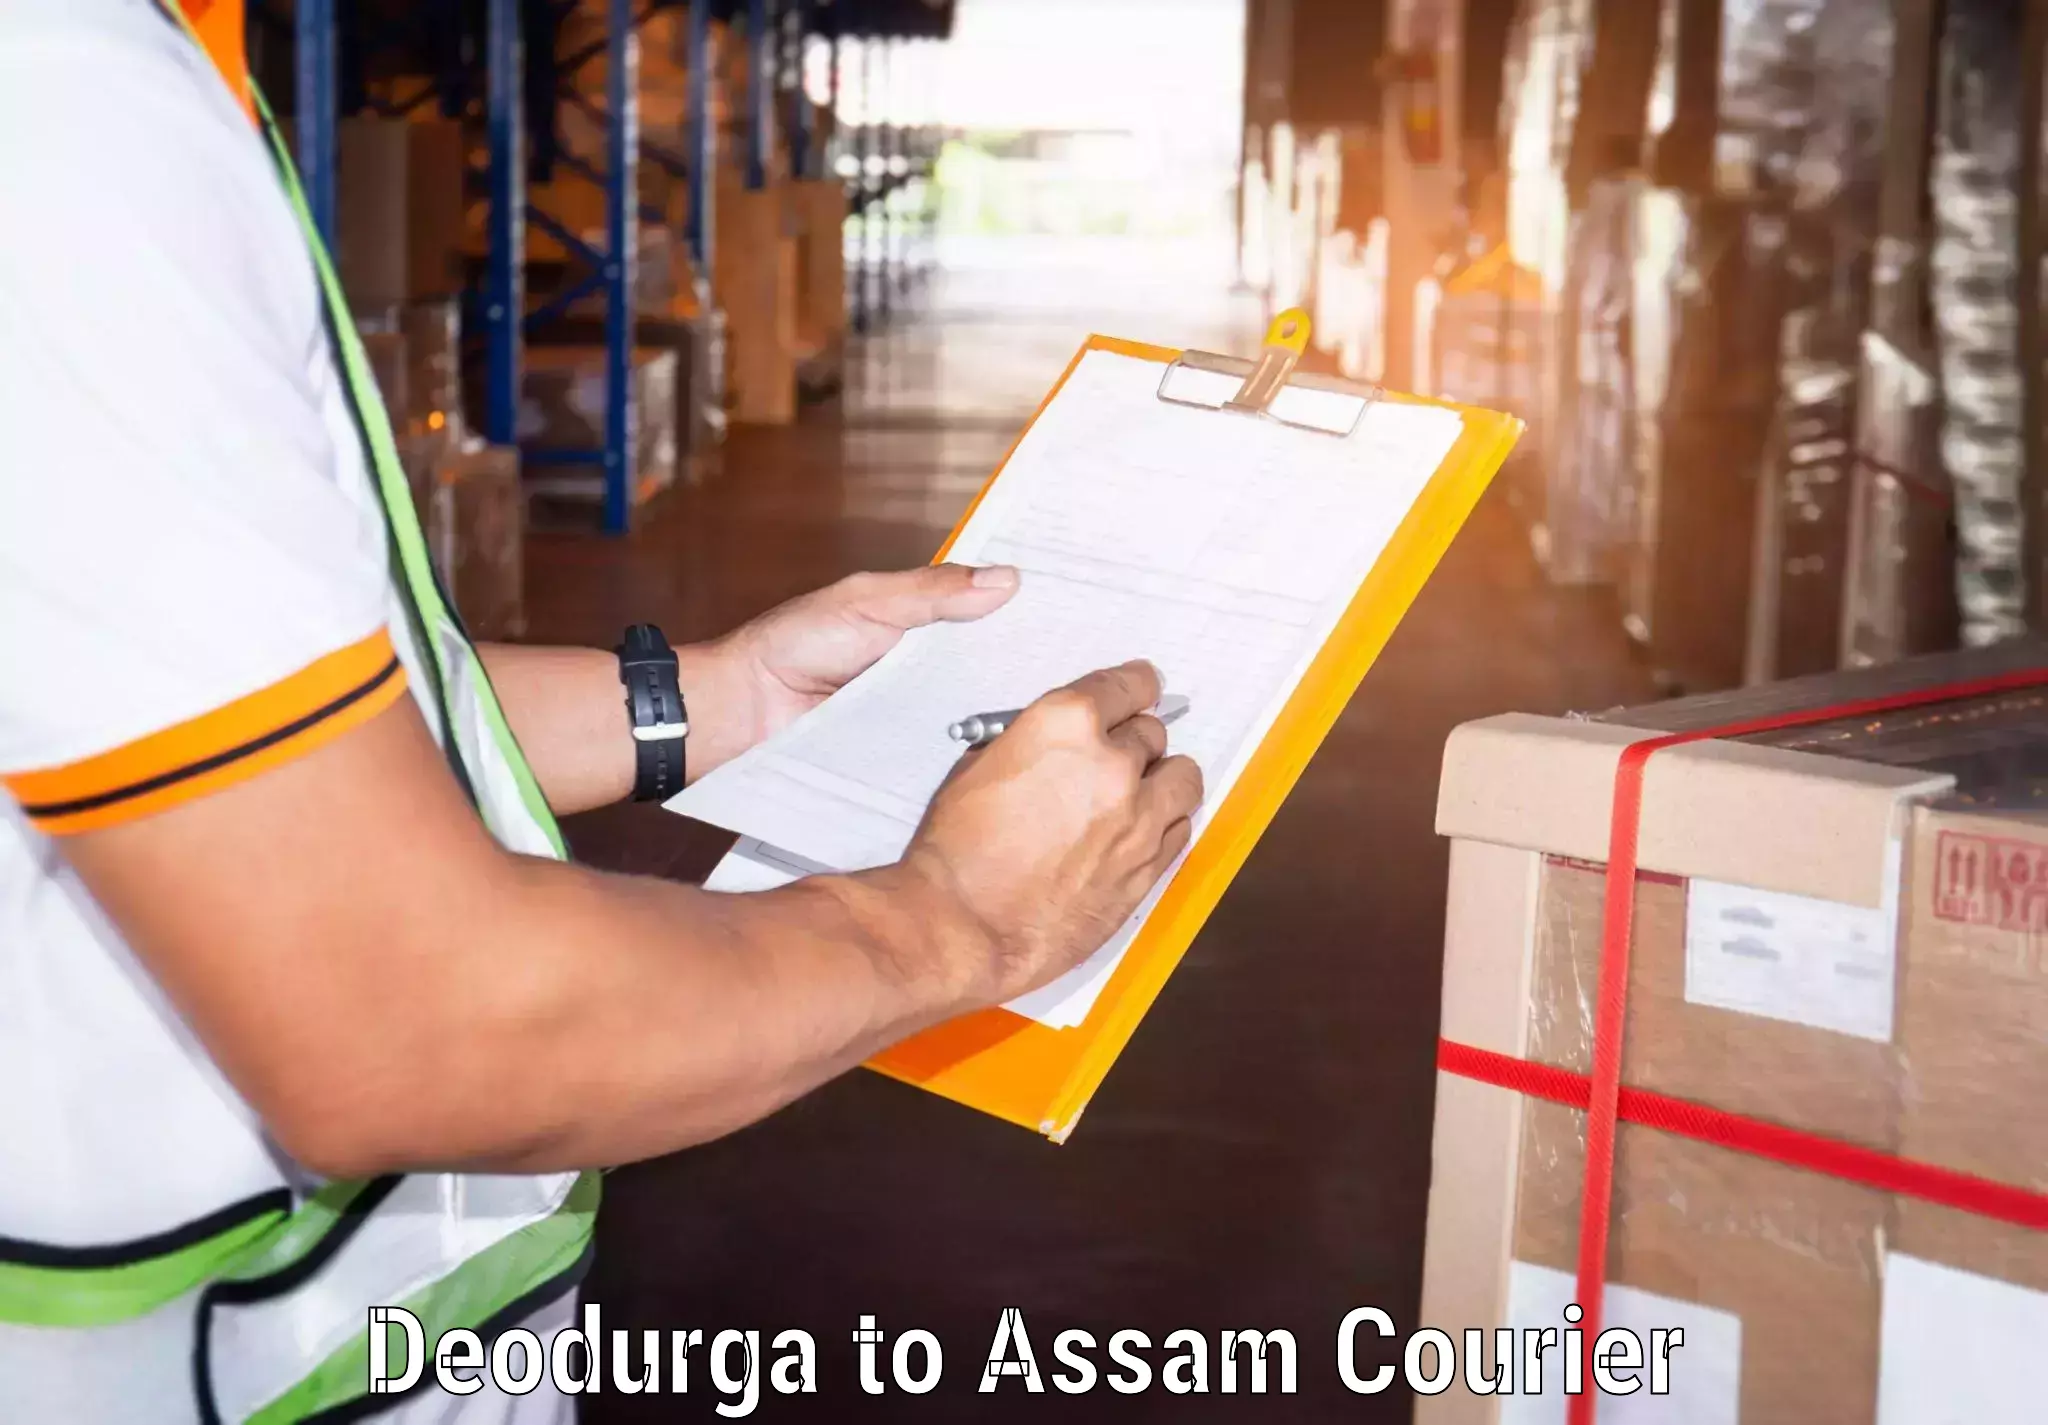 Parcel handling and care in Deodurga to Kamrup